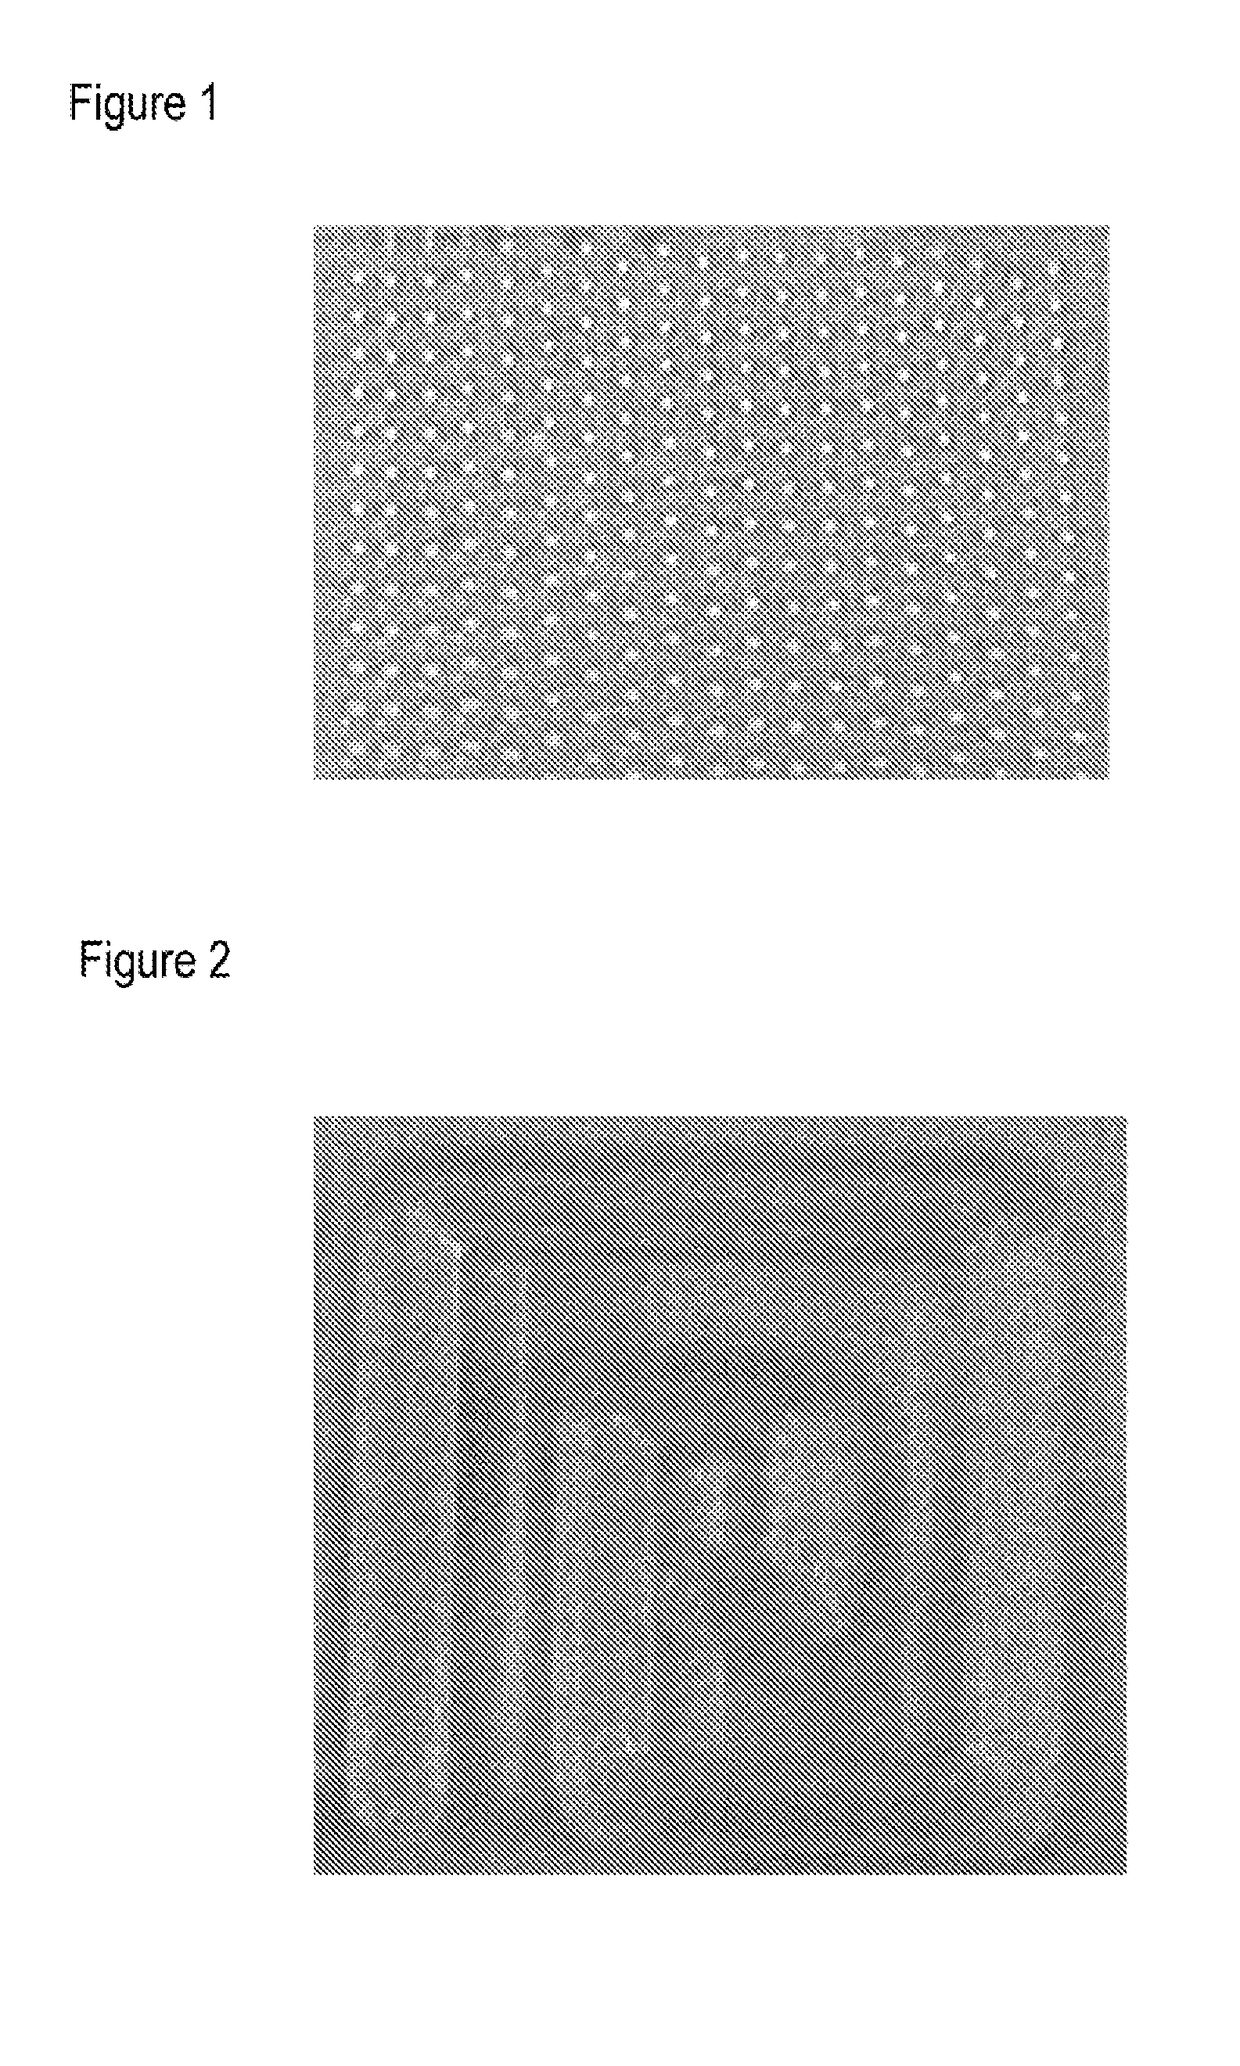 Highly viscous silicone compositions for producing elastomeric molded parts by means of ballistic generative methods